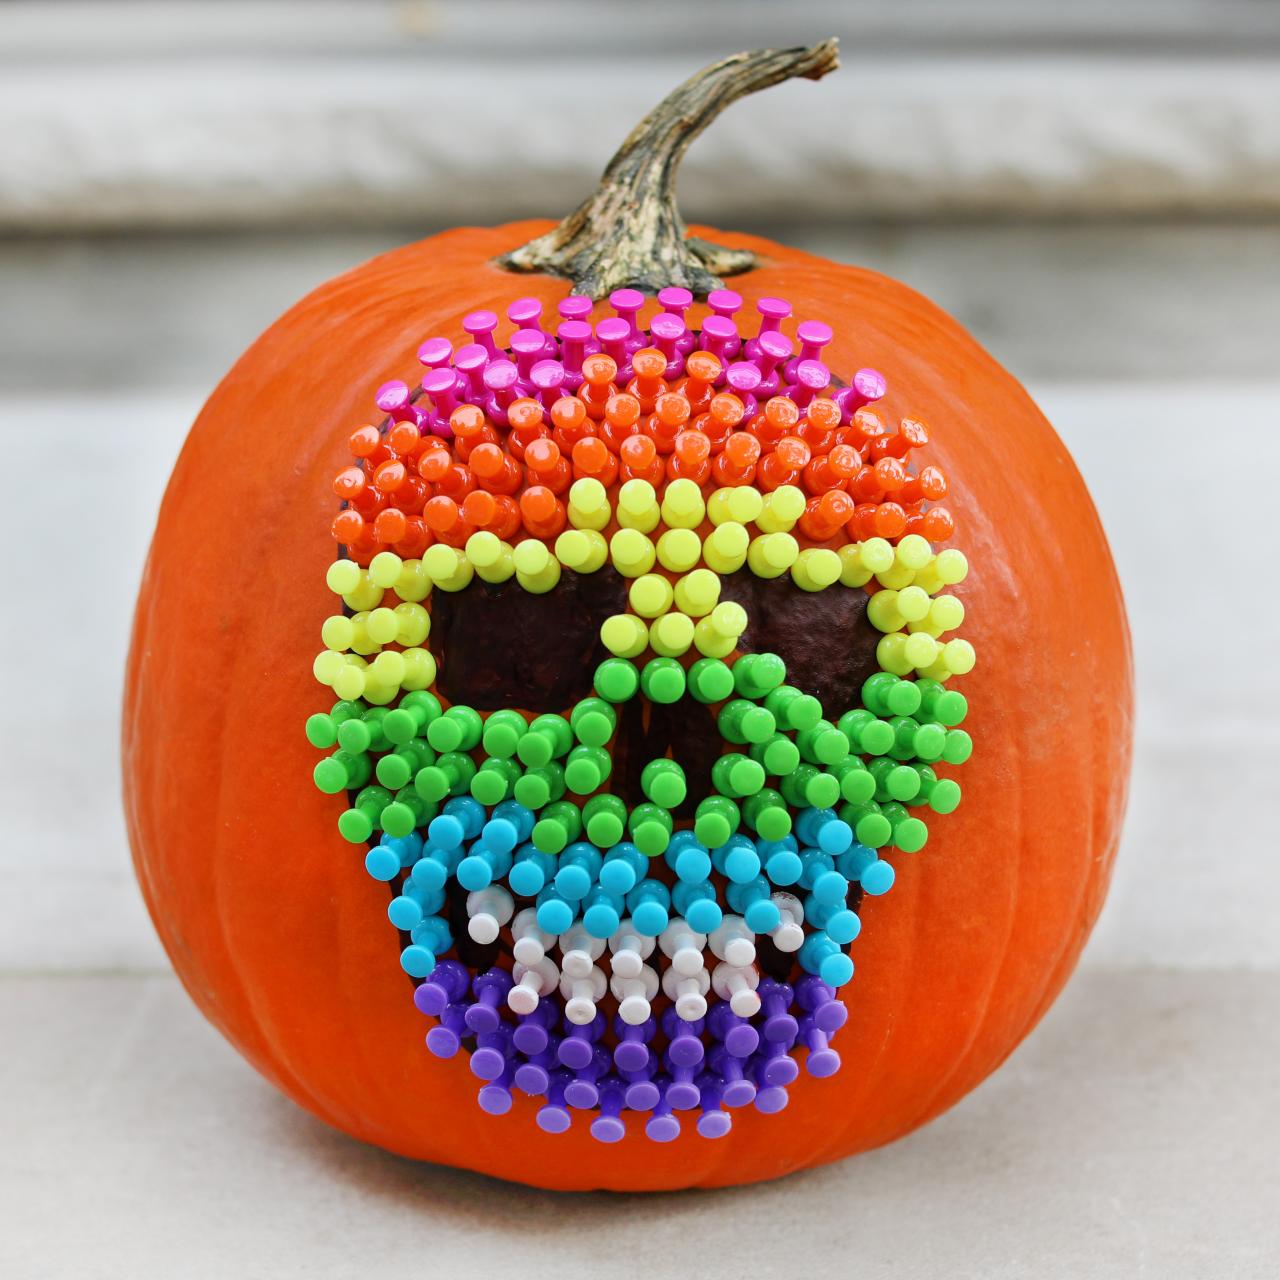 5 Kid-Friendly Pumpkin Decorating Ideas, Halloween Party Ideas and Recipes  : Food Network